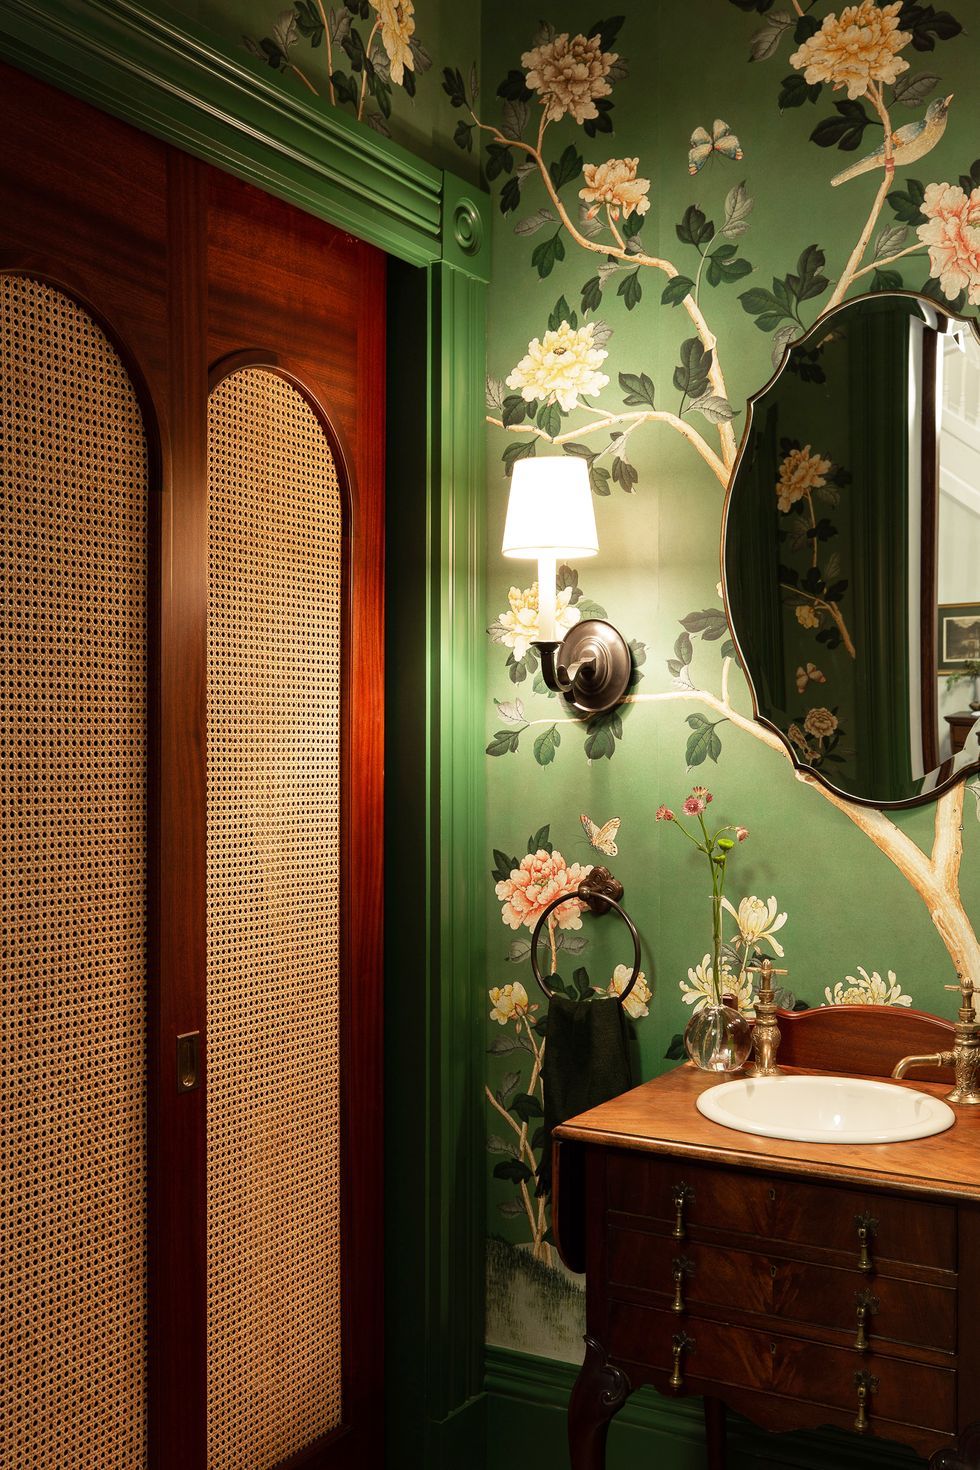 15 Bathroom Wallpaper Ideas That Bring Personality to Any Space